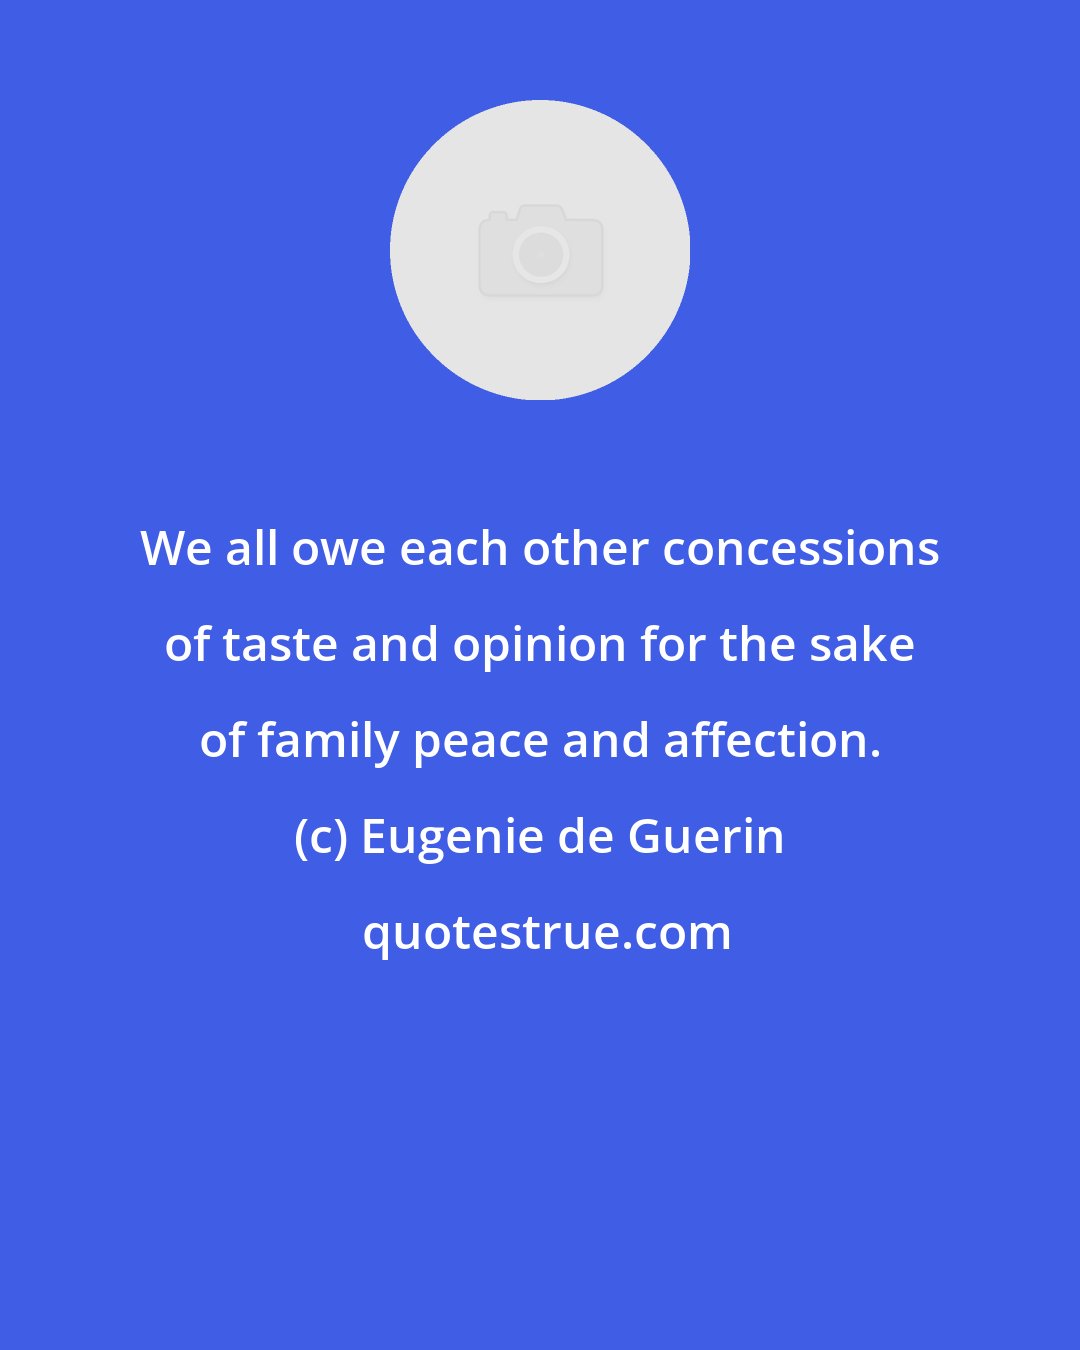 Eugenie de Guerin: We all owe each other concessions of taste and opinion for the sake of family peace and affection.